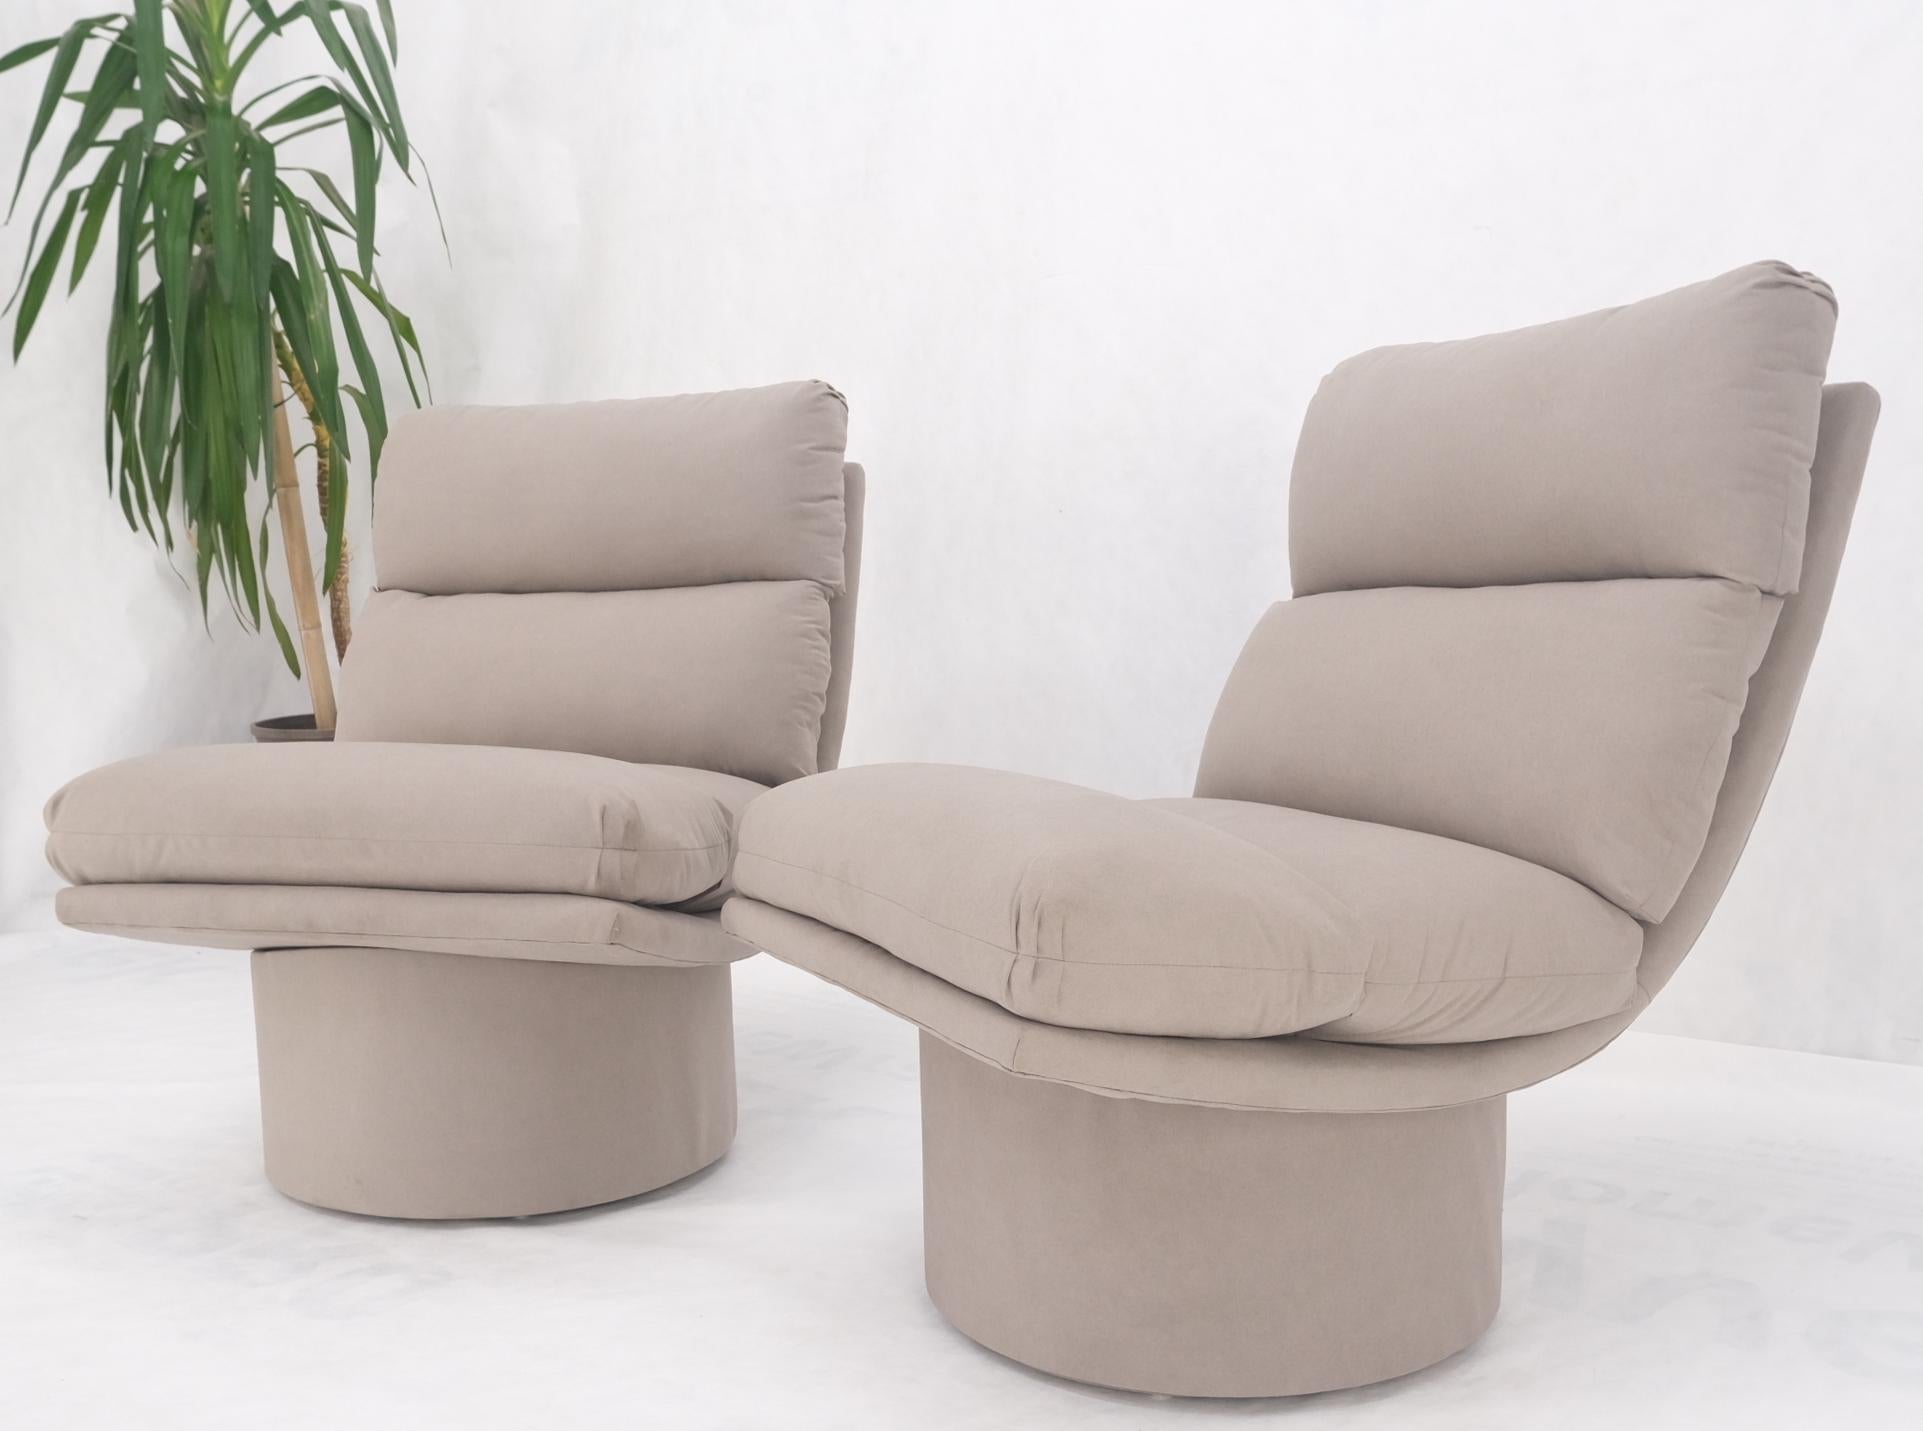 Pair New Light Coffee to Grey Alcantera Upholstery Scoop Lounge Chairs SHARP! For Sale 7